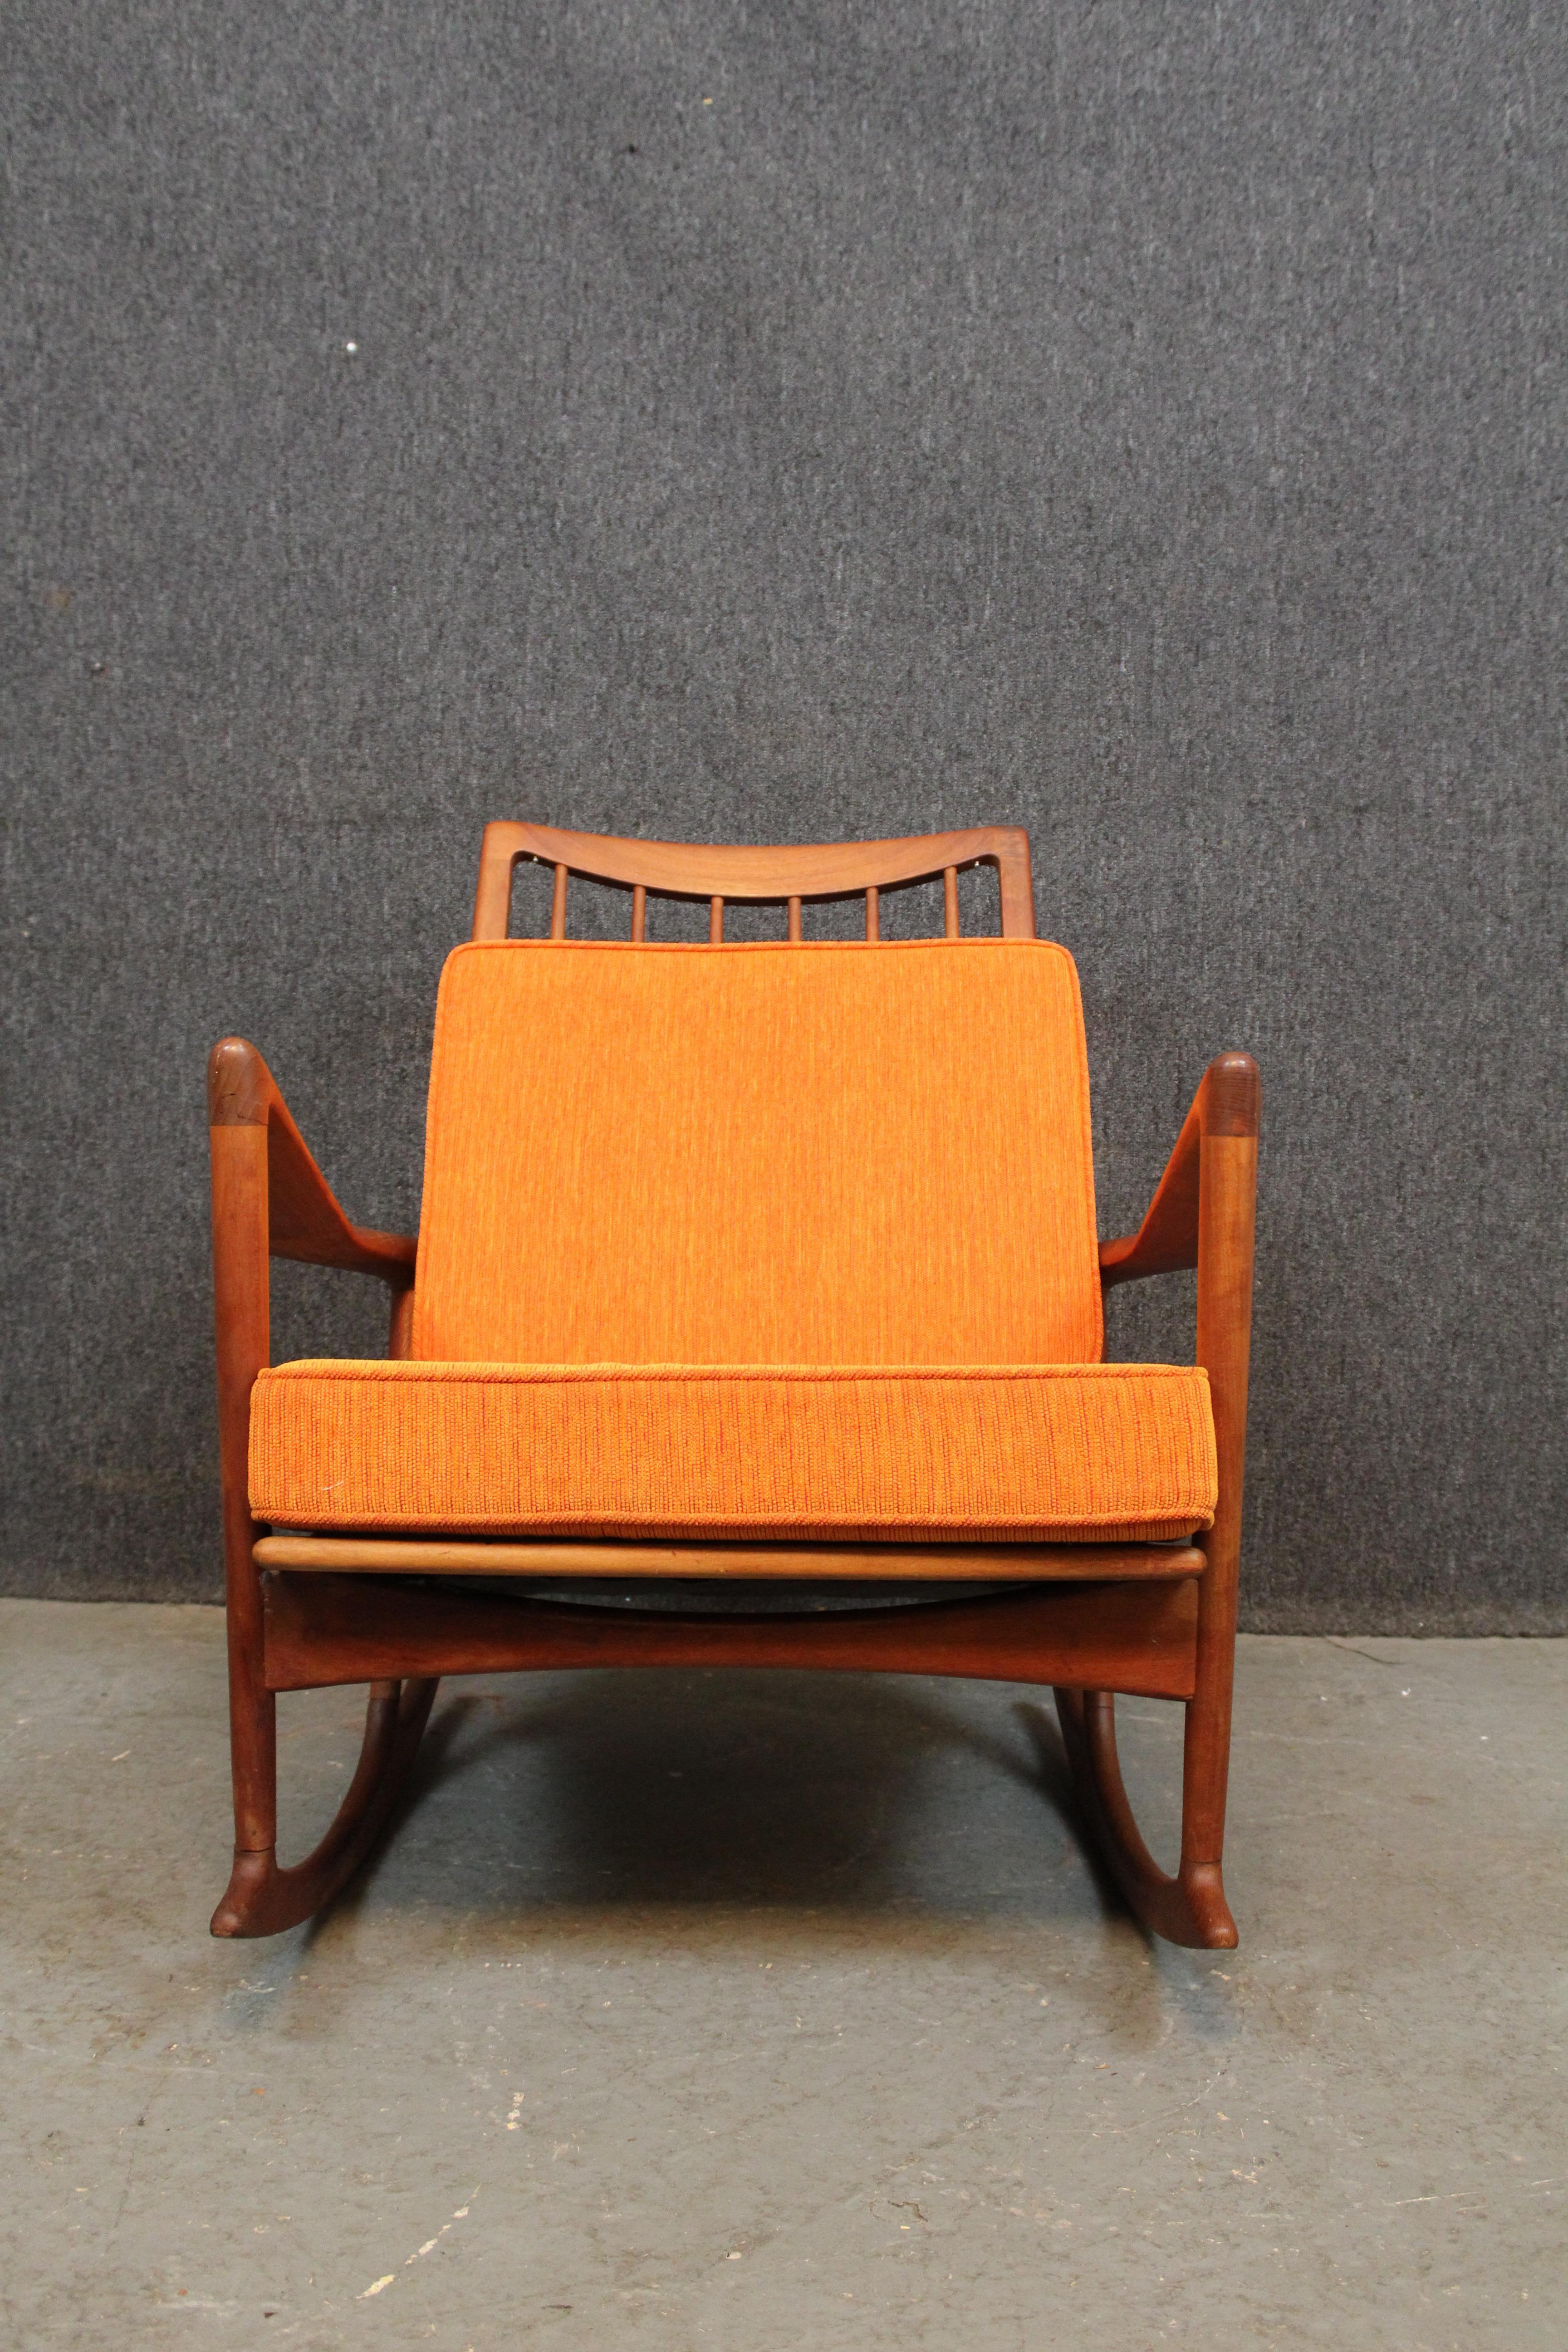 20th Century Vintage Sculptural Rocking Chair by Ib Kofod-Larsen for Selig Denmark For Sale